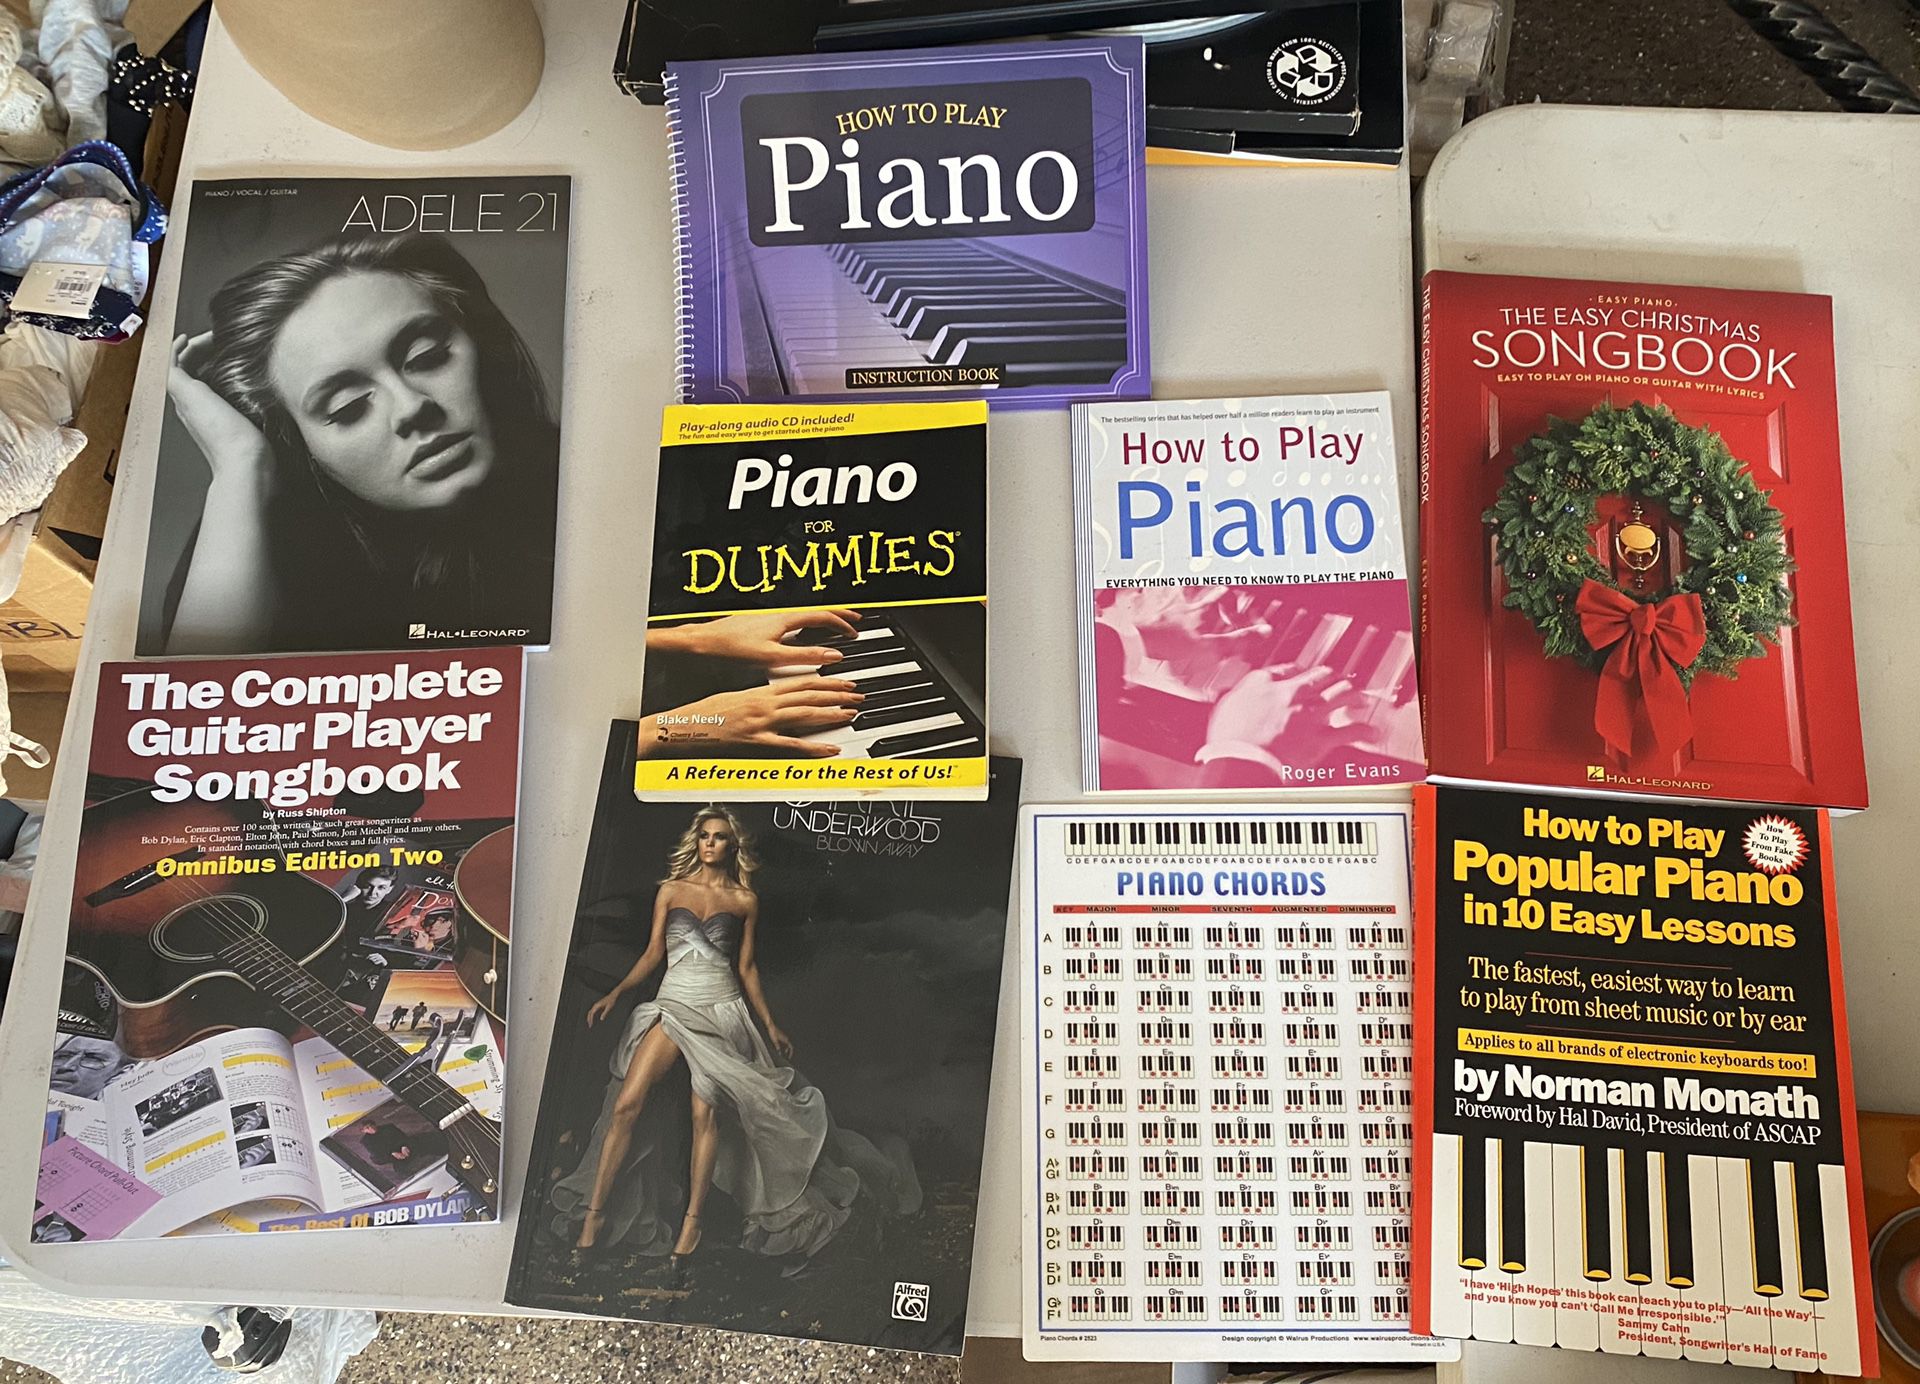 Piano, Guitar, Vocal Books, How to Play, for Dummies, Christmas, The Complete Guitar Player Songbook, Adele 21, Carrie Underwood